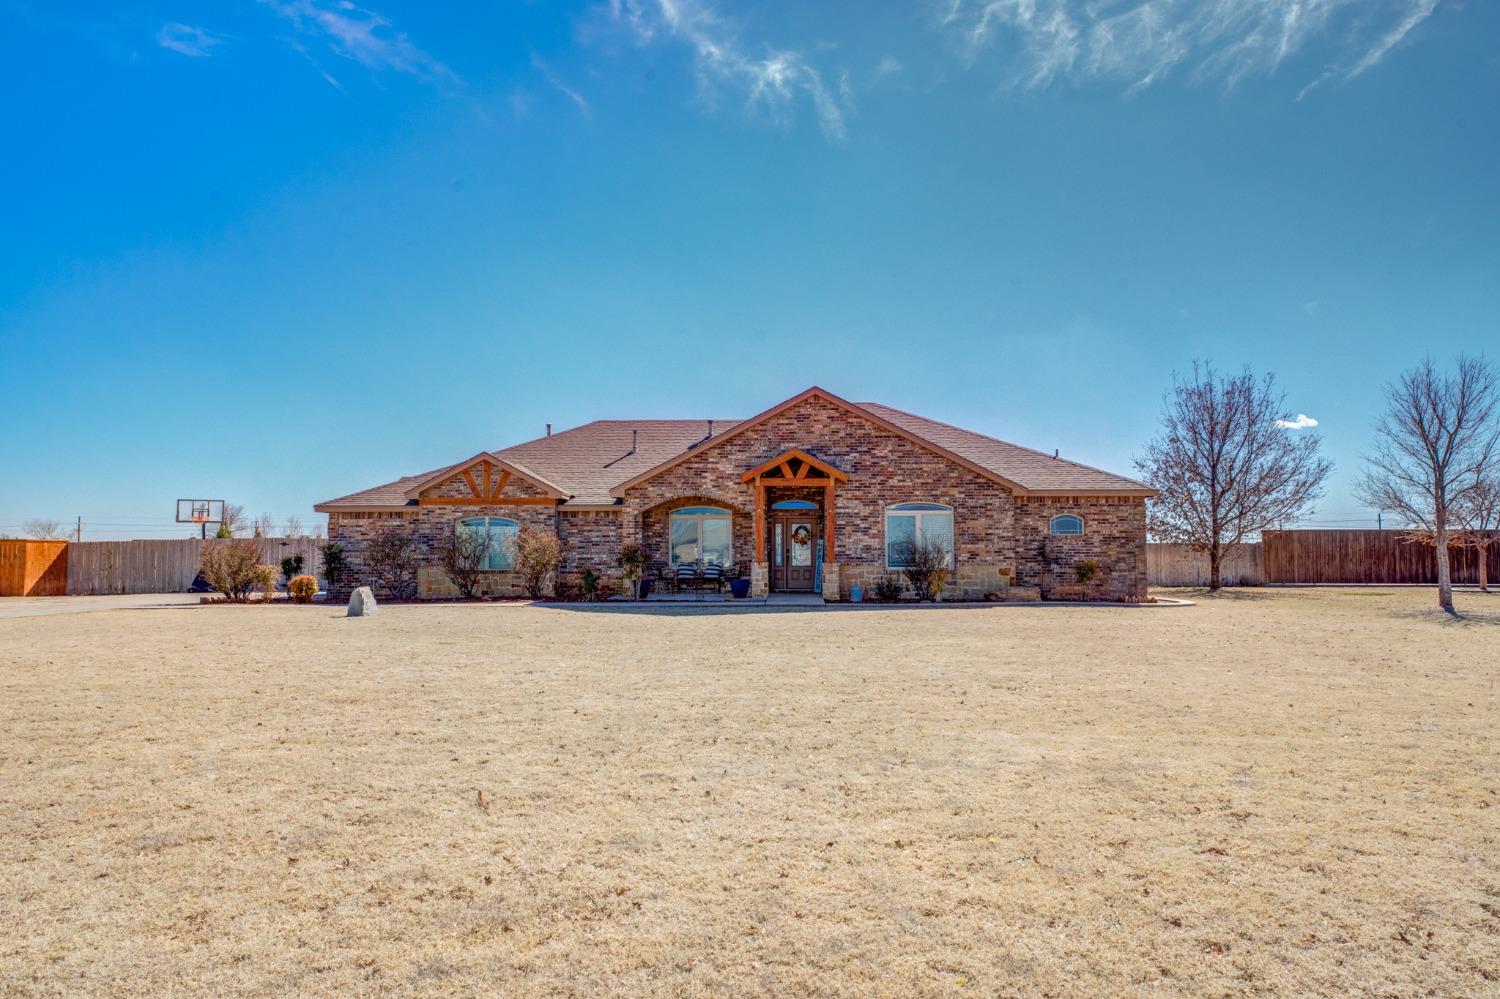 Don't miss this 4/4/2 home with an office AND bonus room that sits on an acre of land in the sought after neighborhood of Cooper Ranch in Lubbock-Cooper ISD! The living room flows perfectly into the kitchen area with a breakfast bar and island space.  The master bathroom features a relaxing Jacuzzi soak tub, separate vanities and a large closet with plenty of storage space. Don't miss the large laundry room and mud room conveniently located right by the garage. With ample space in the backyard, you'll find this to be the perfect place for kids or pets to play!